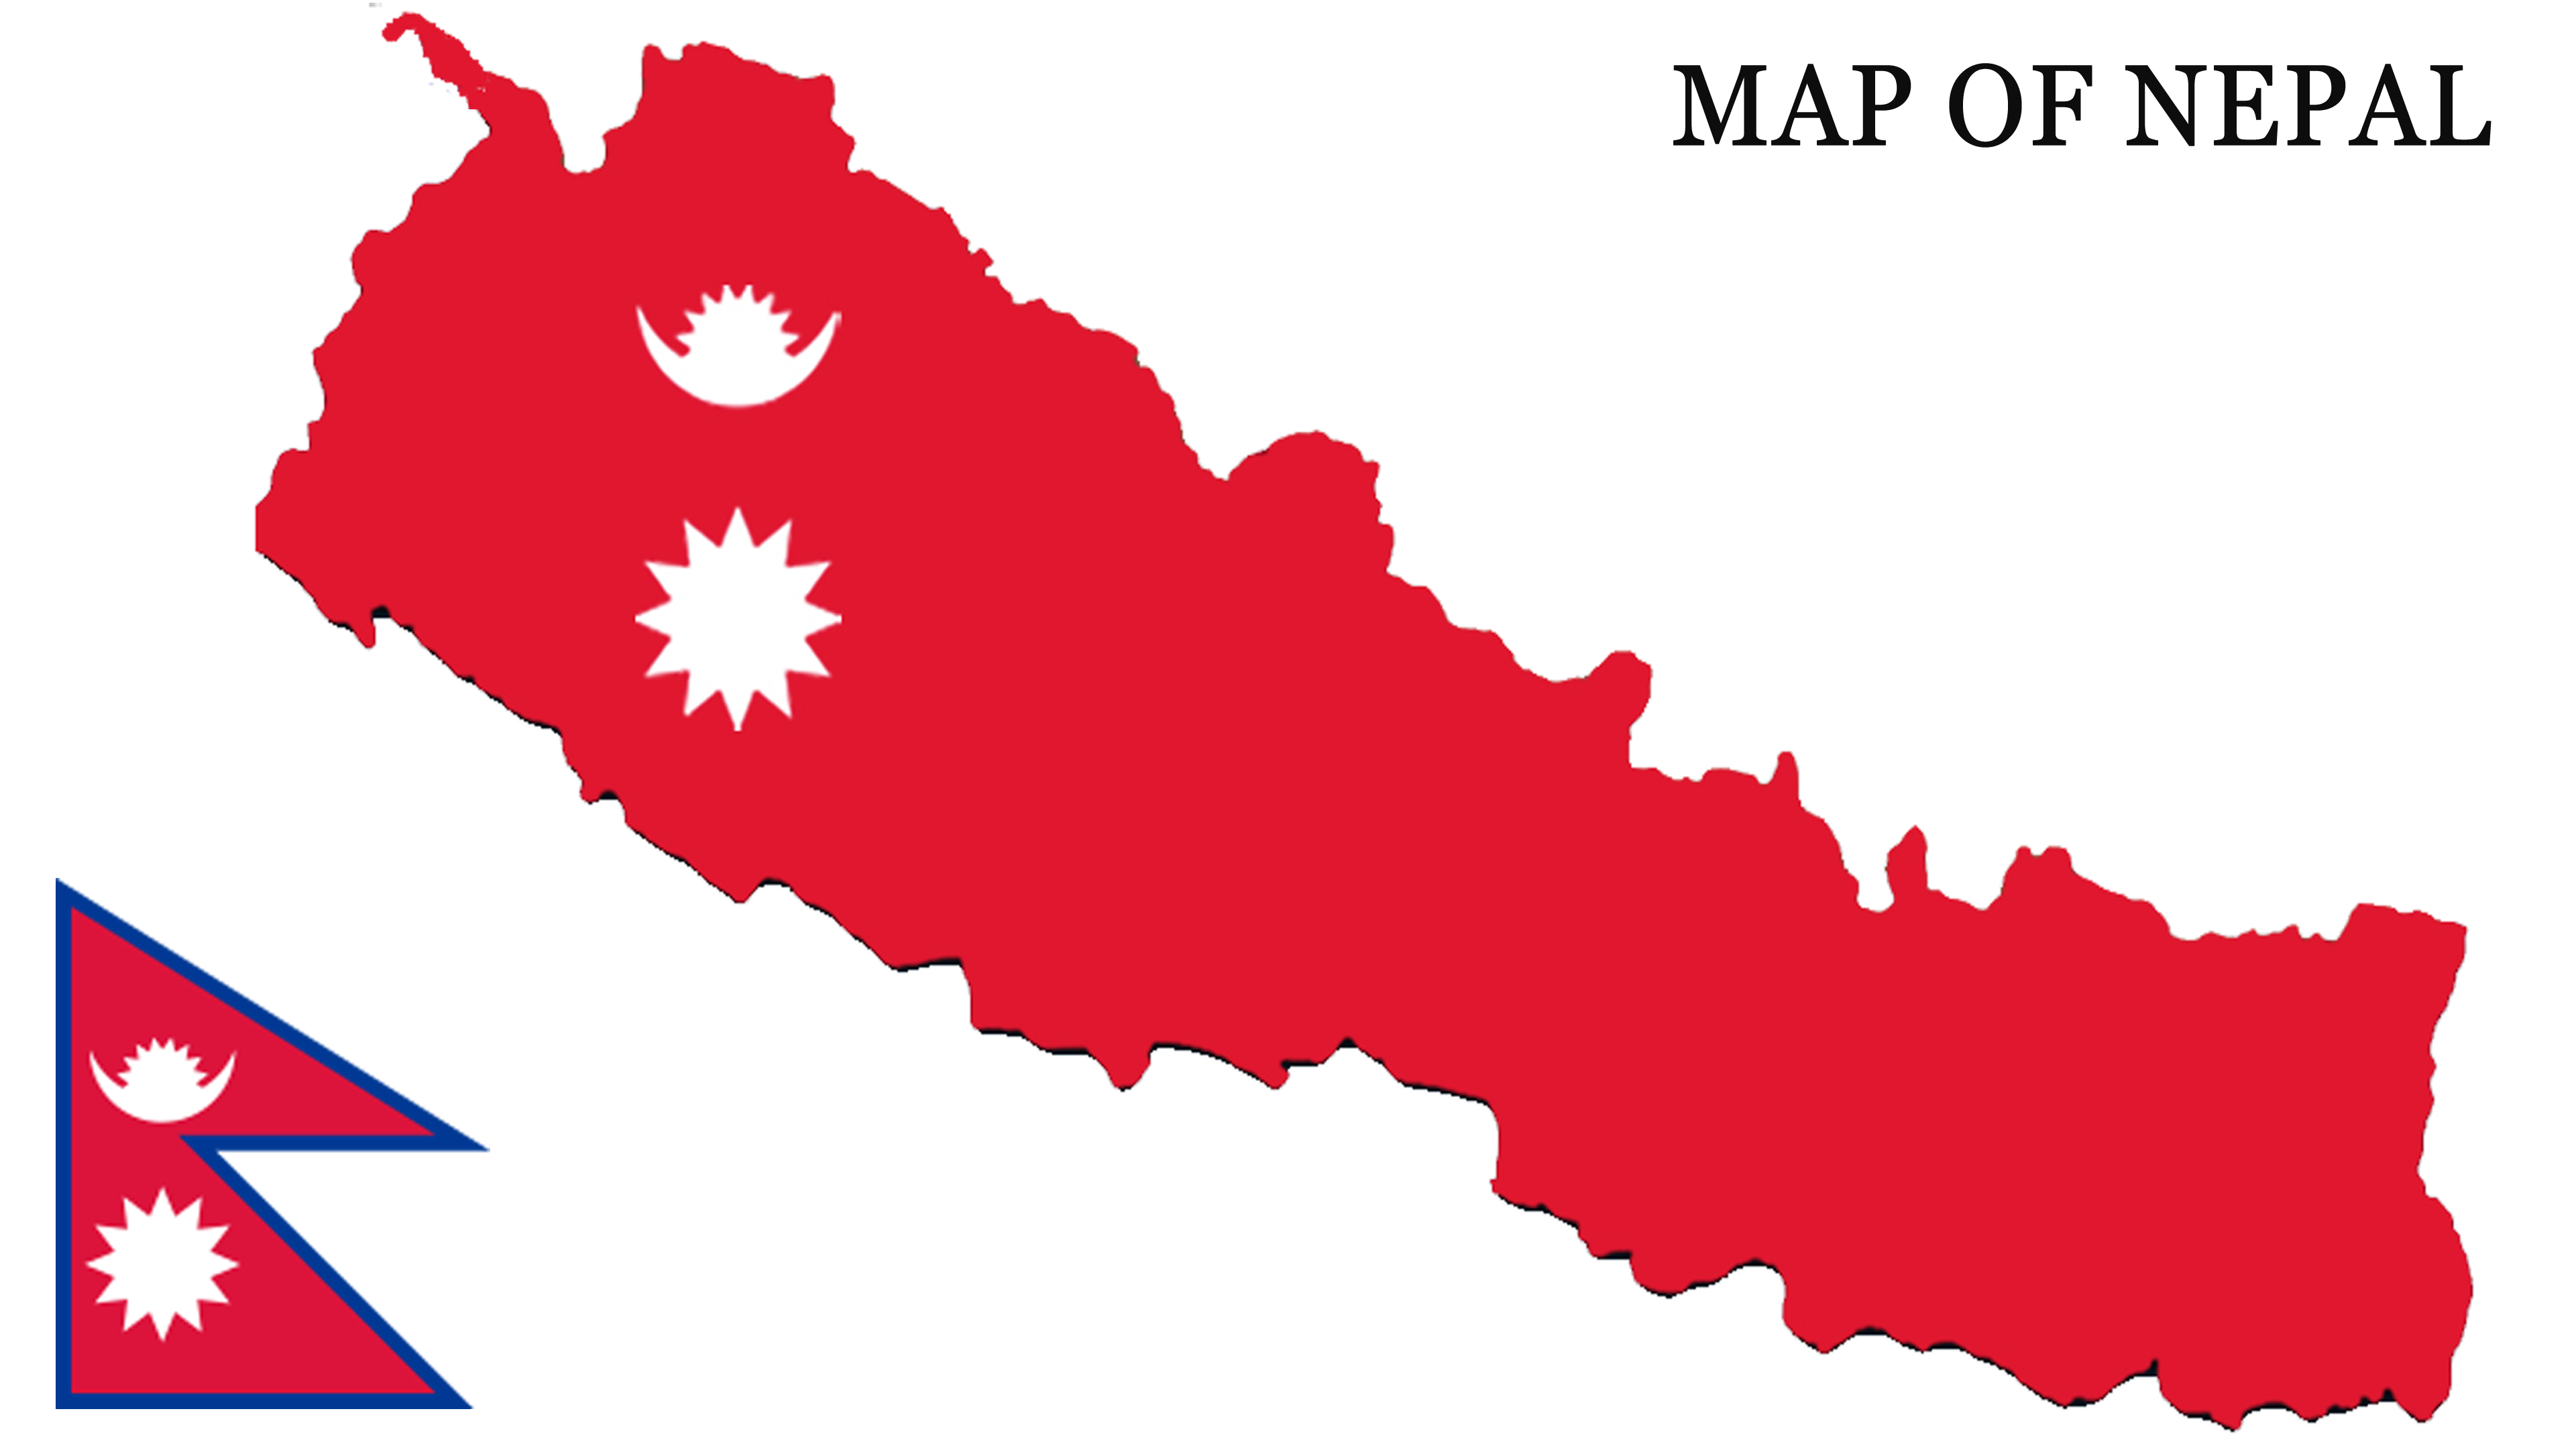 Nepal’s land divided in 11 categories